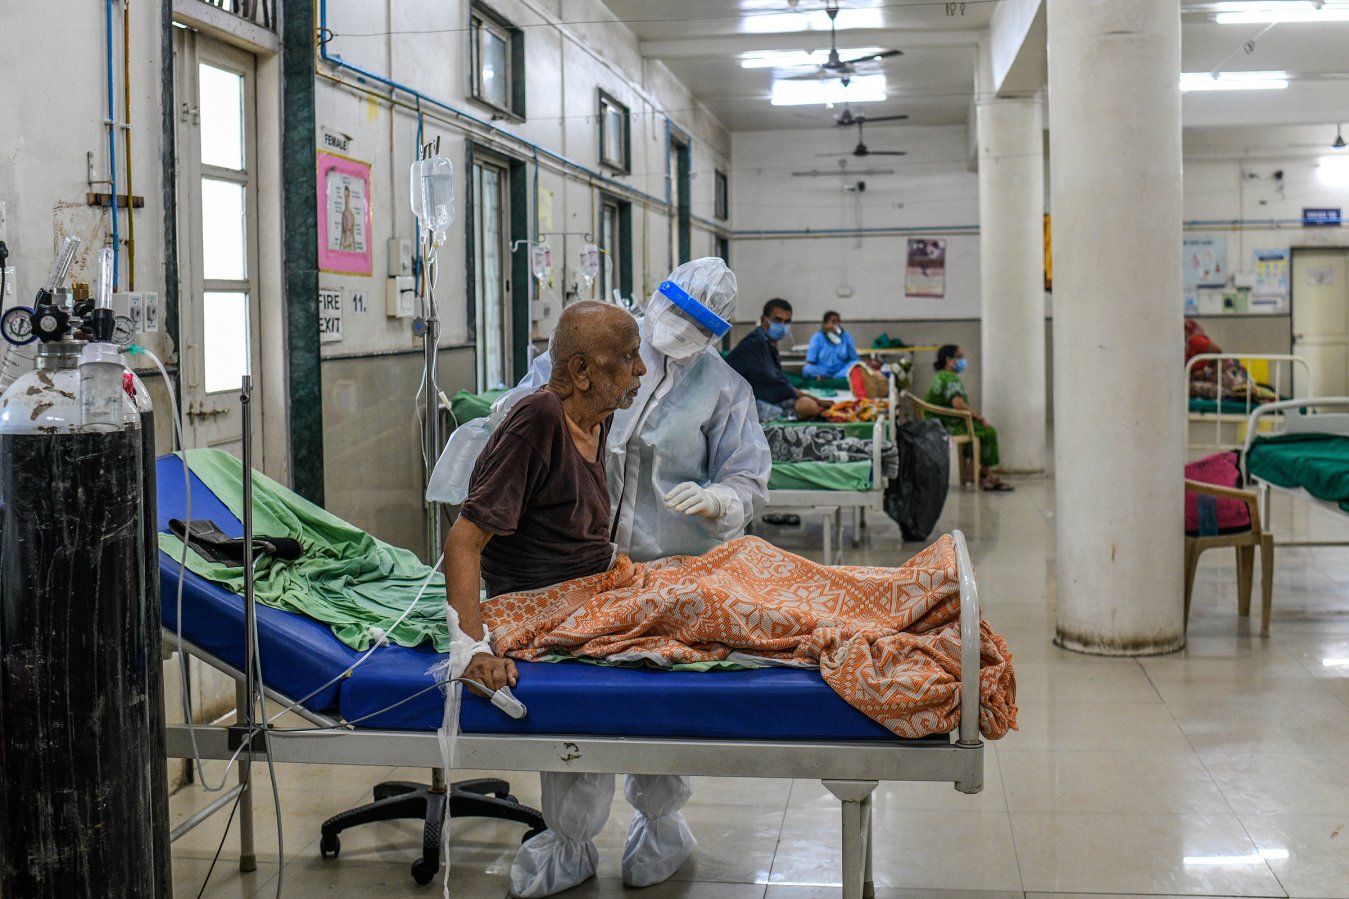 A nurse cares for a COVID-19 patient in the ICU at the Aundh District Hospital in Pune on Aug. 11.